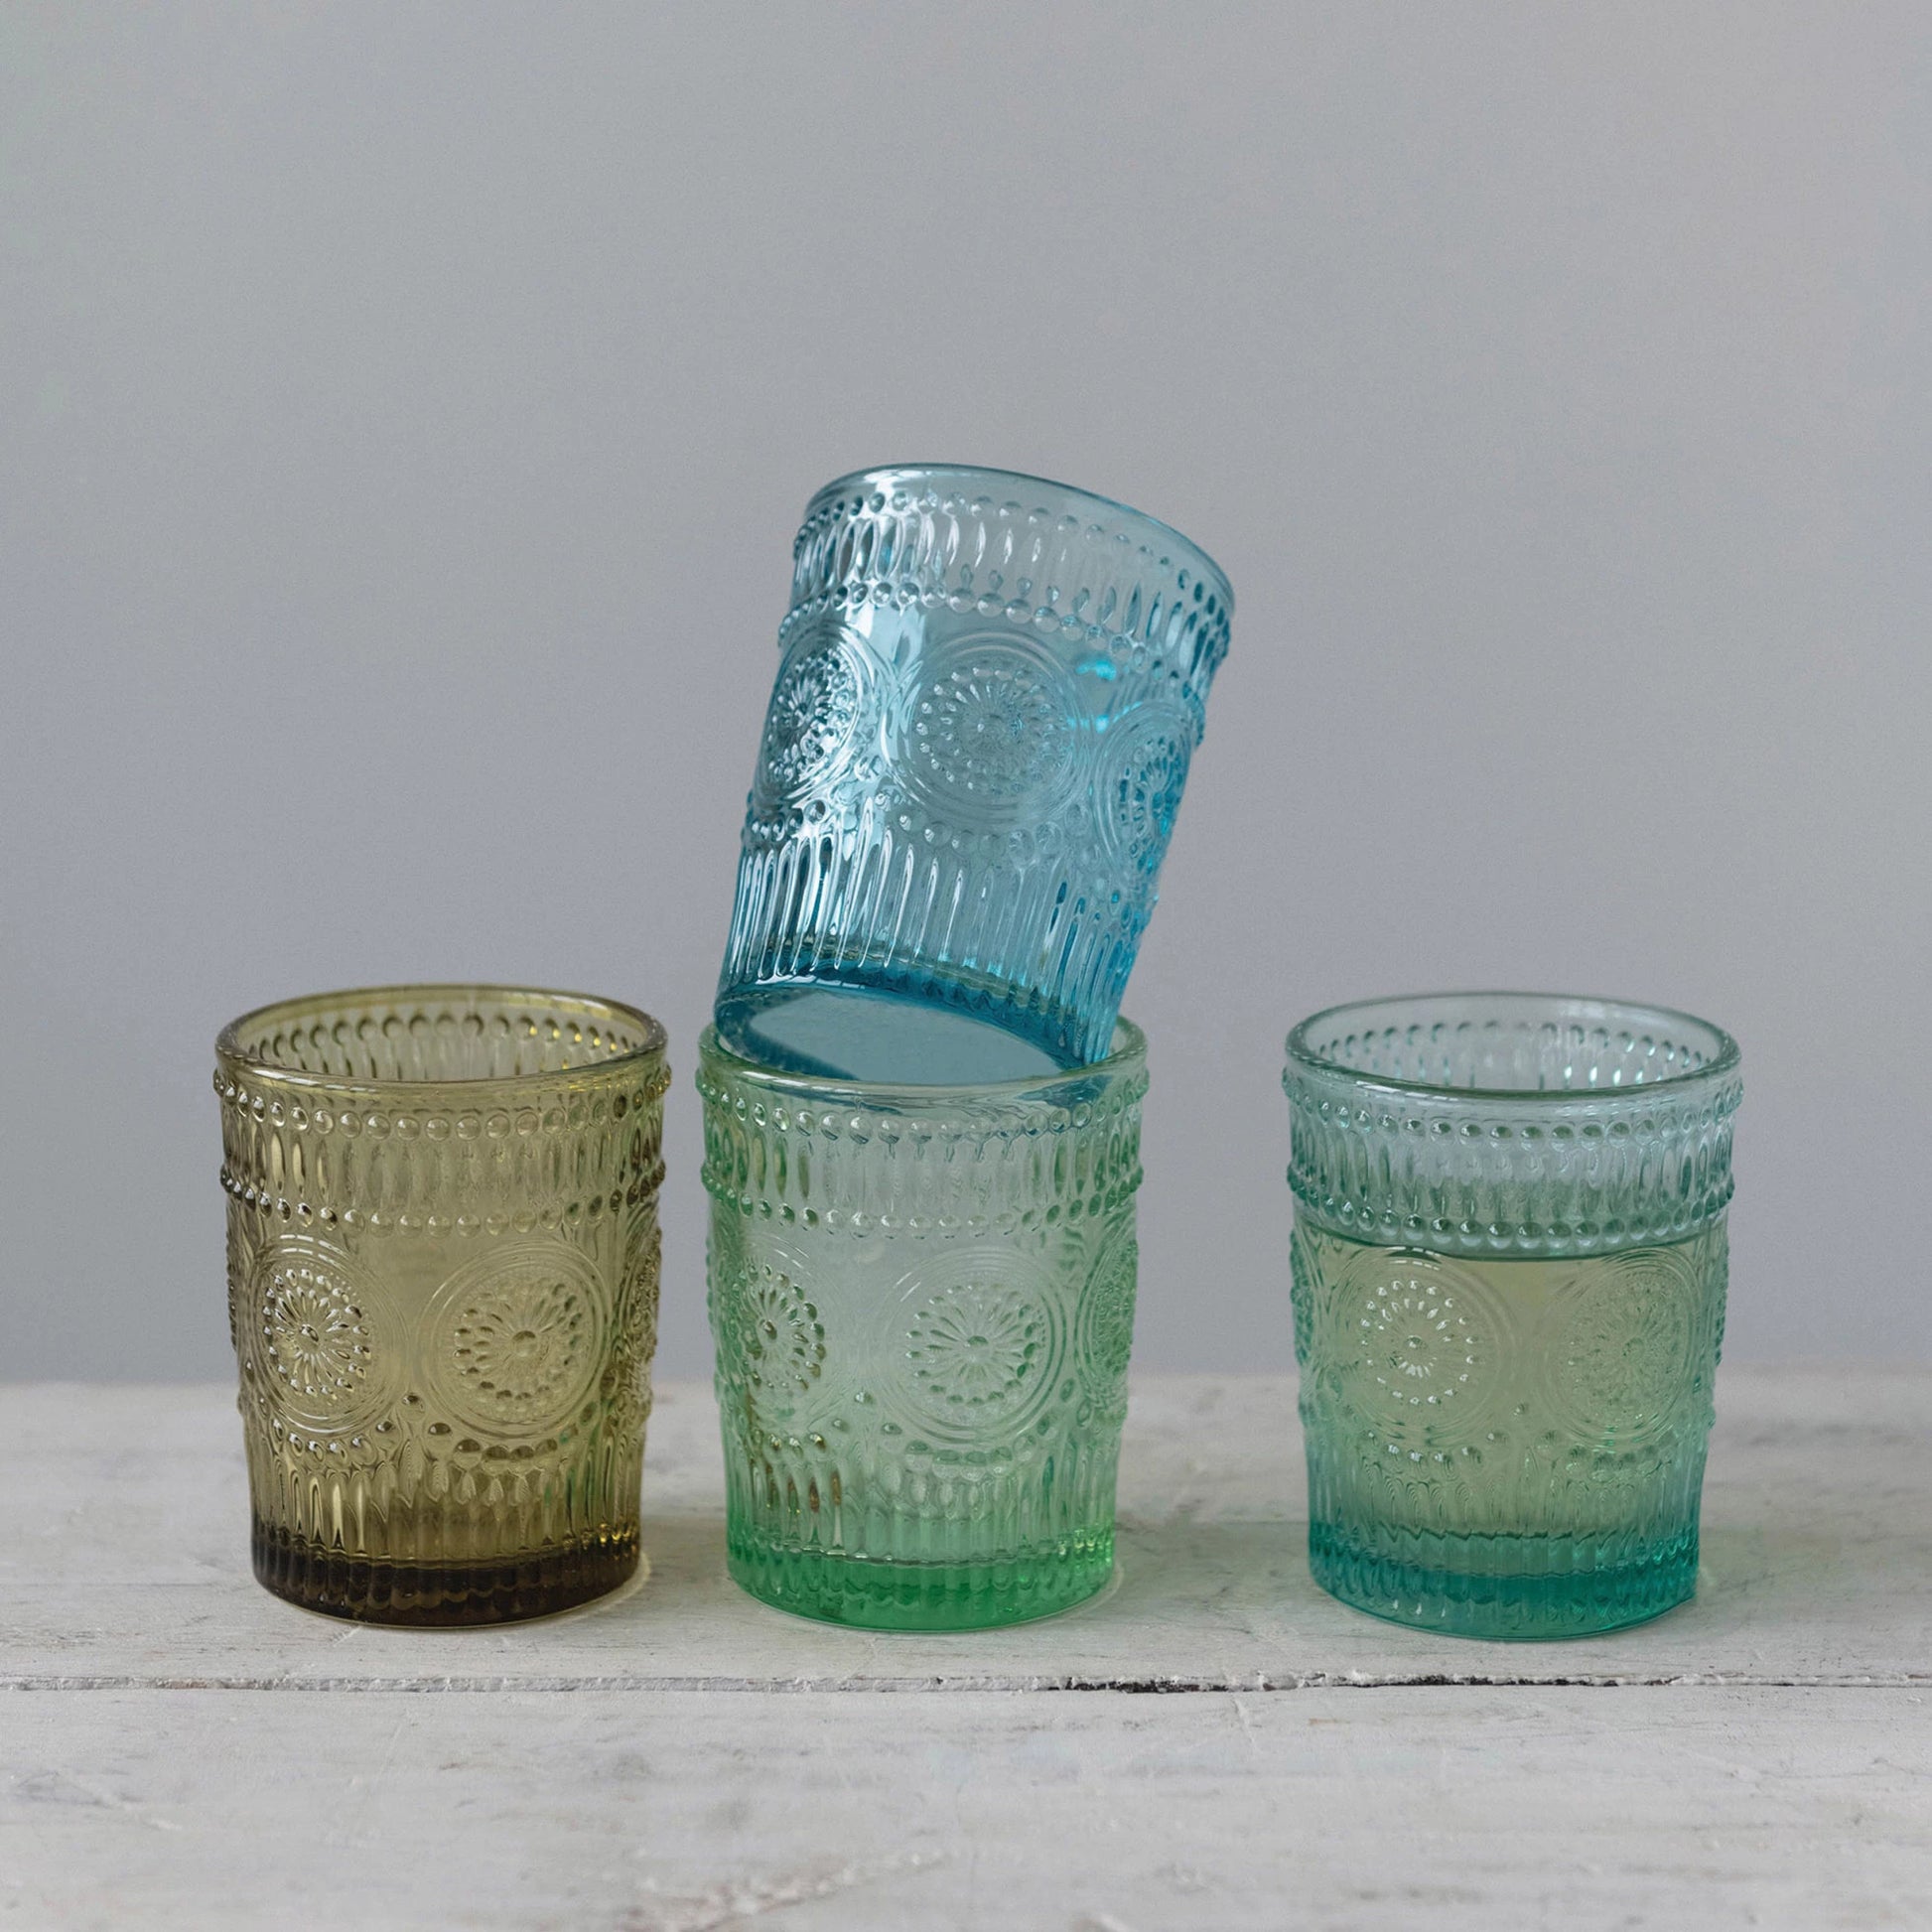 4 drinking glasses with embossed patterns on a wooden table, one glass is stacked on top of another.